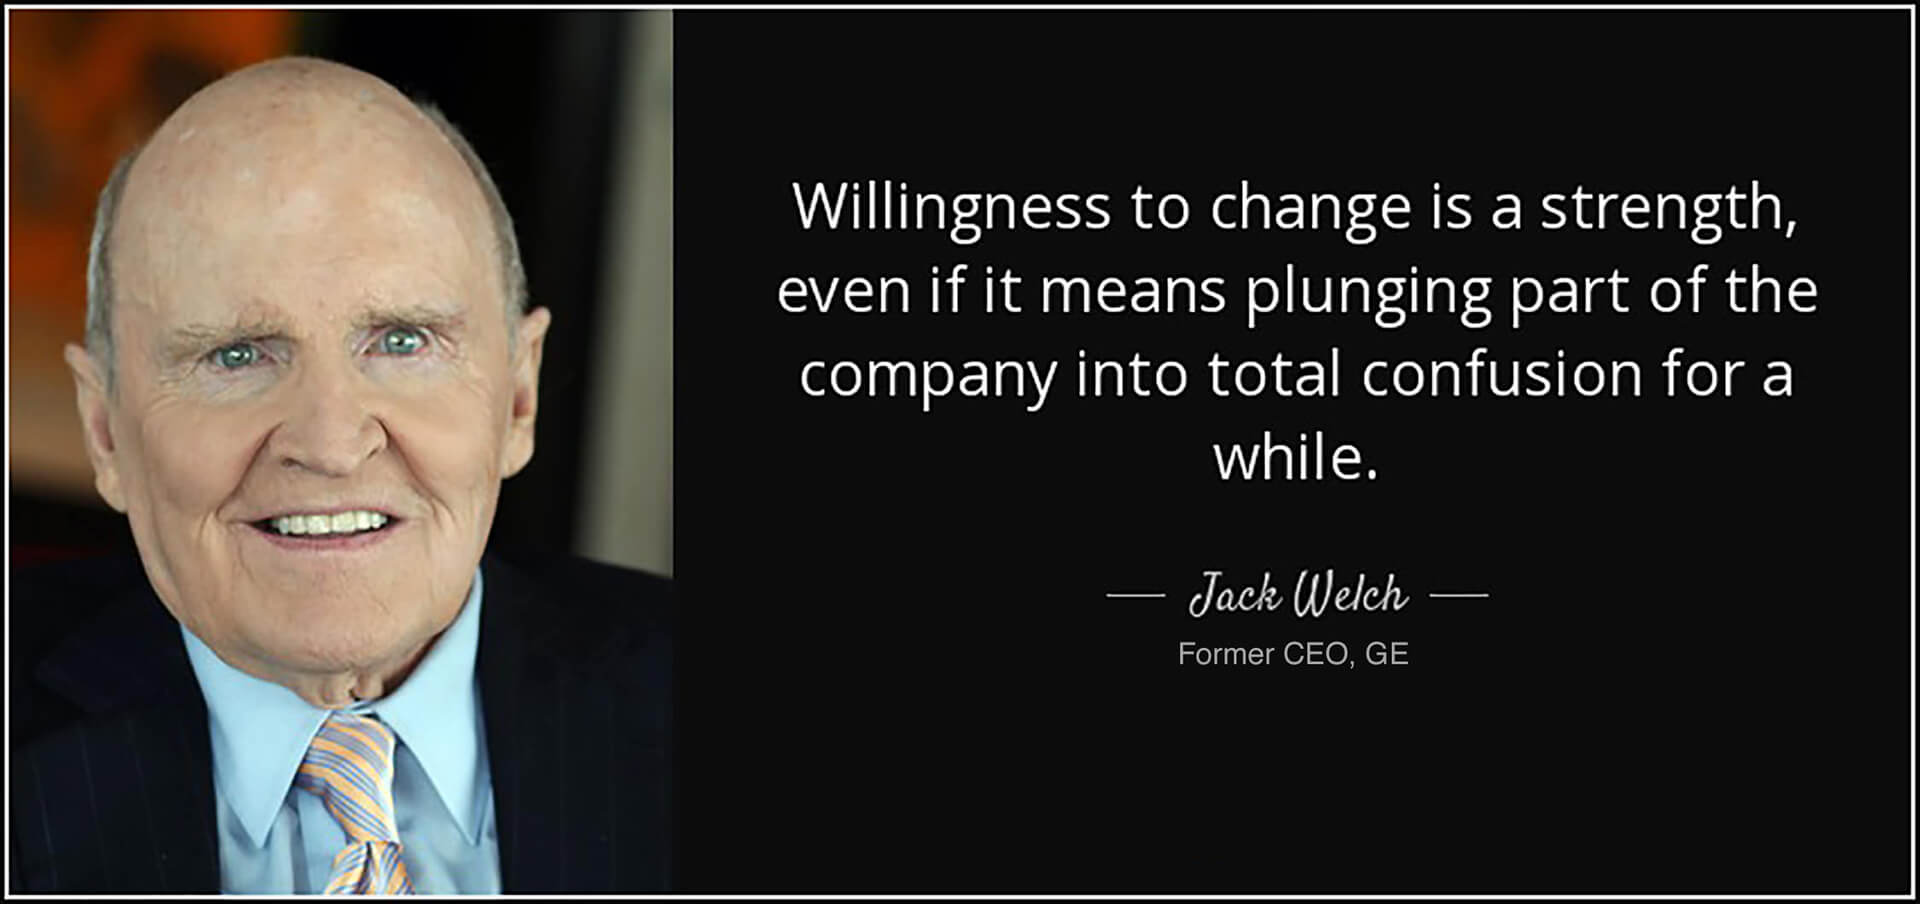 Jack welch's quote